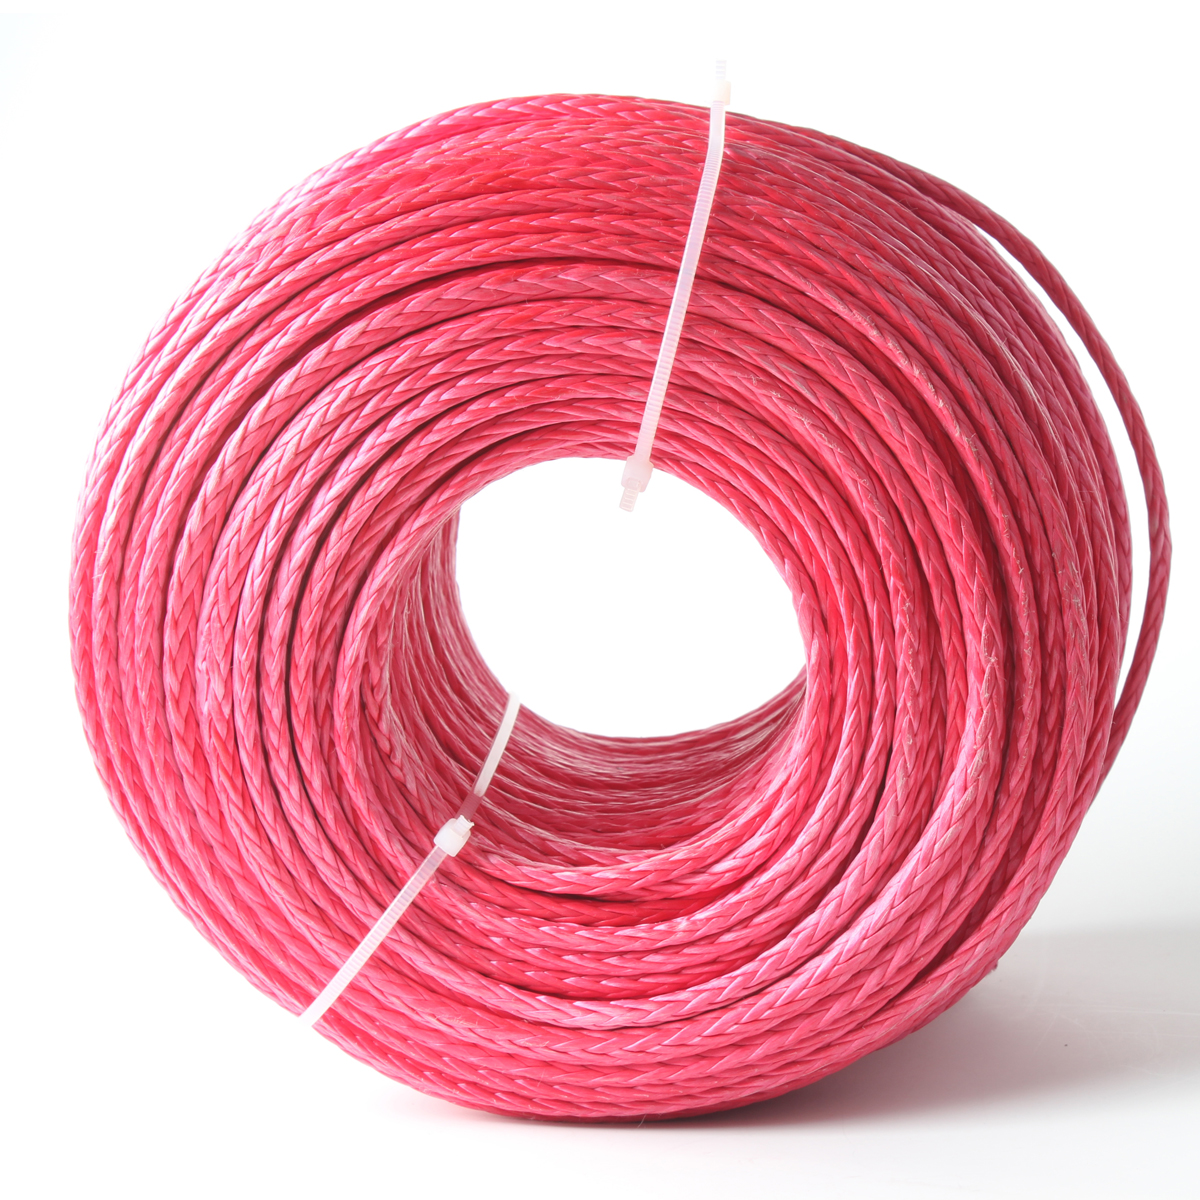 4mm 5/32" UHMWPE hang glider towing winch rope